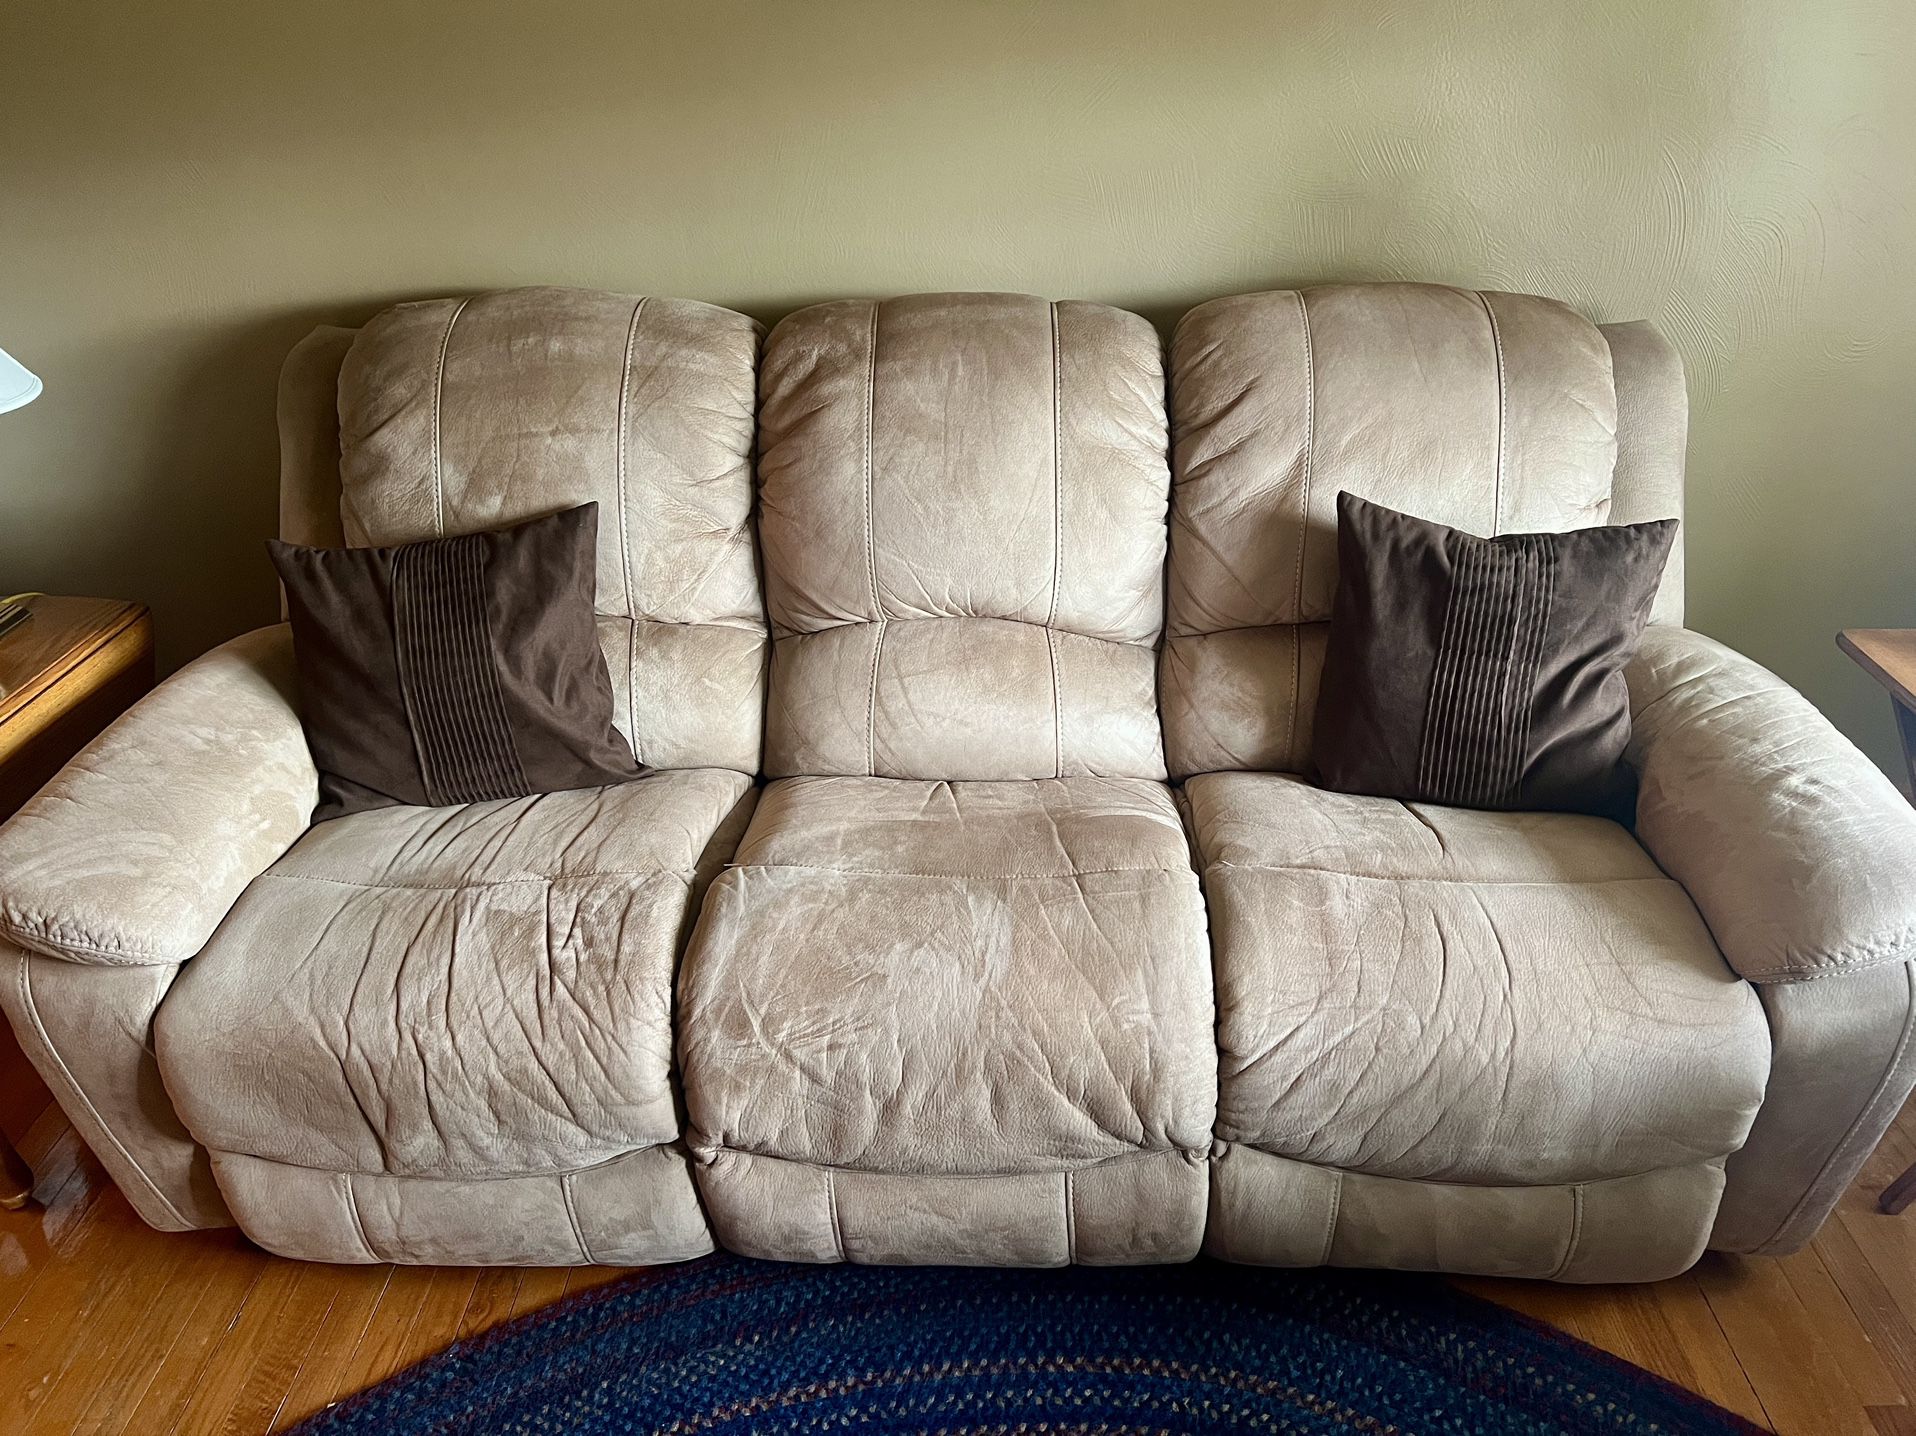 Laz-Y-Boy Couch With double Recliners